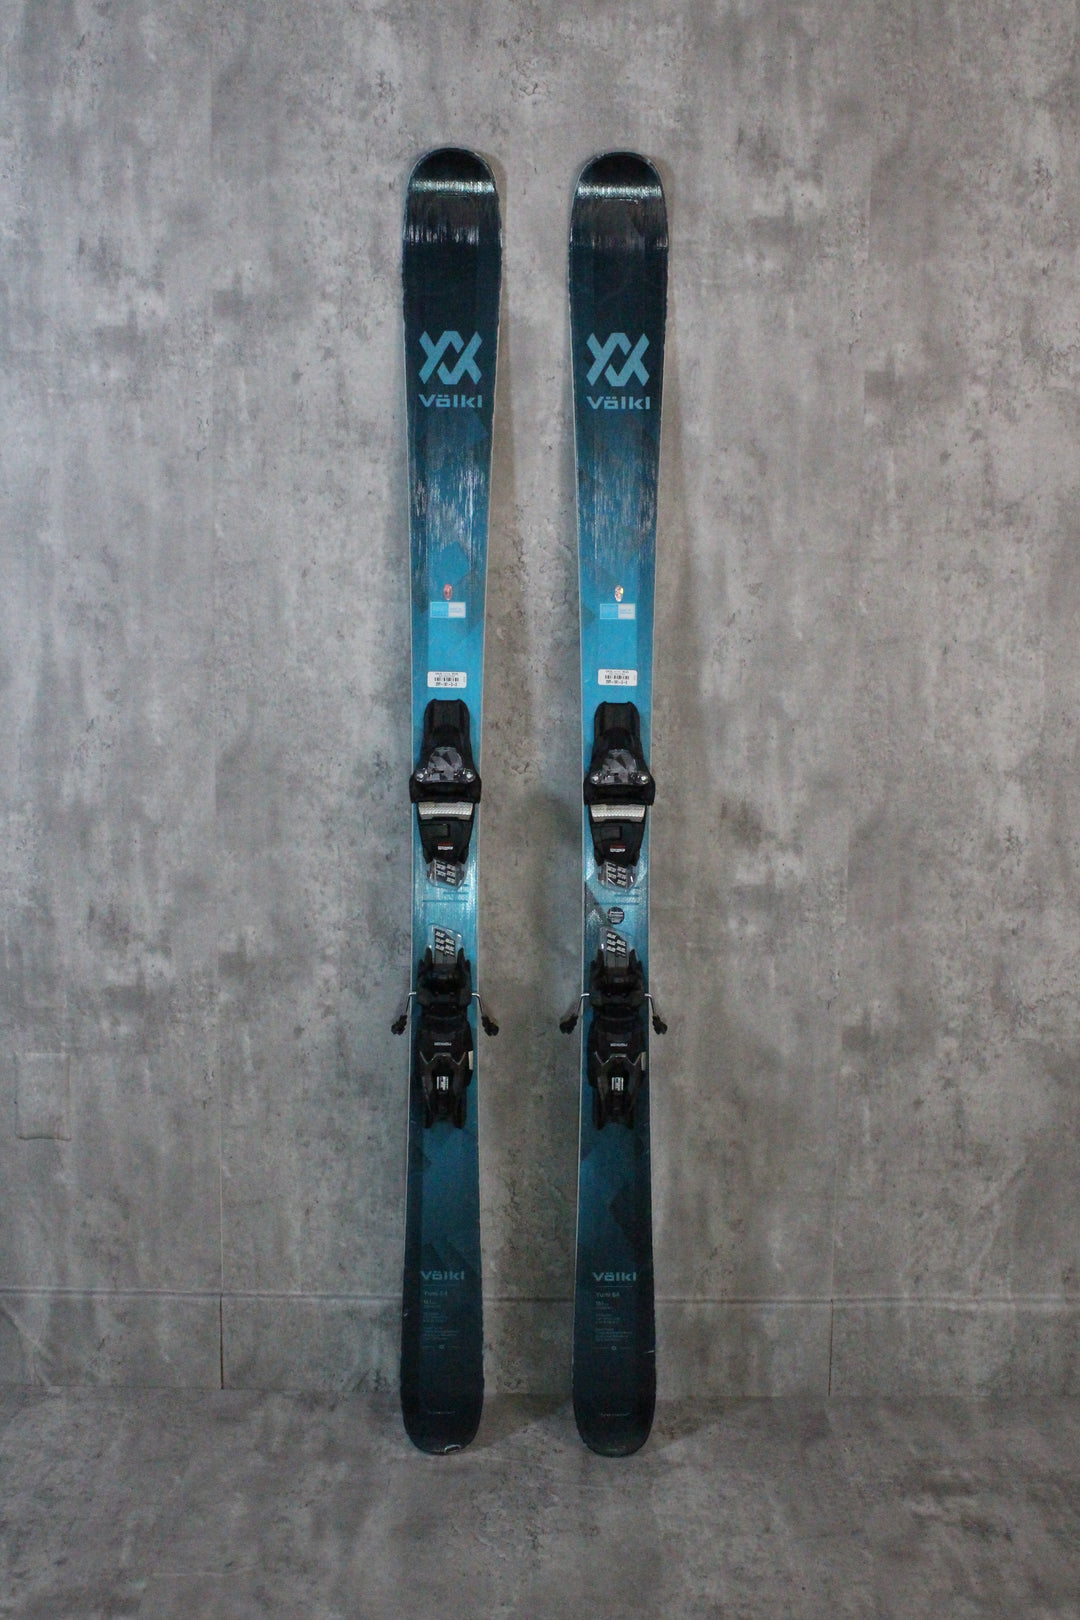 The Yumi skis feature tip and tail rockers, an 84 mm waist, and a 3D radius sidecut for easy, playful turns. Combining glass frame construction with Titanal for stability and power transfer, they feel lively yet can handle aggressive use. With improved on-piste performance and off-groomed versatility, these skis cater to a wide range of skiers. Available as used demo skis online or at Switchback Sports in Park City.